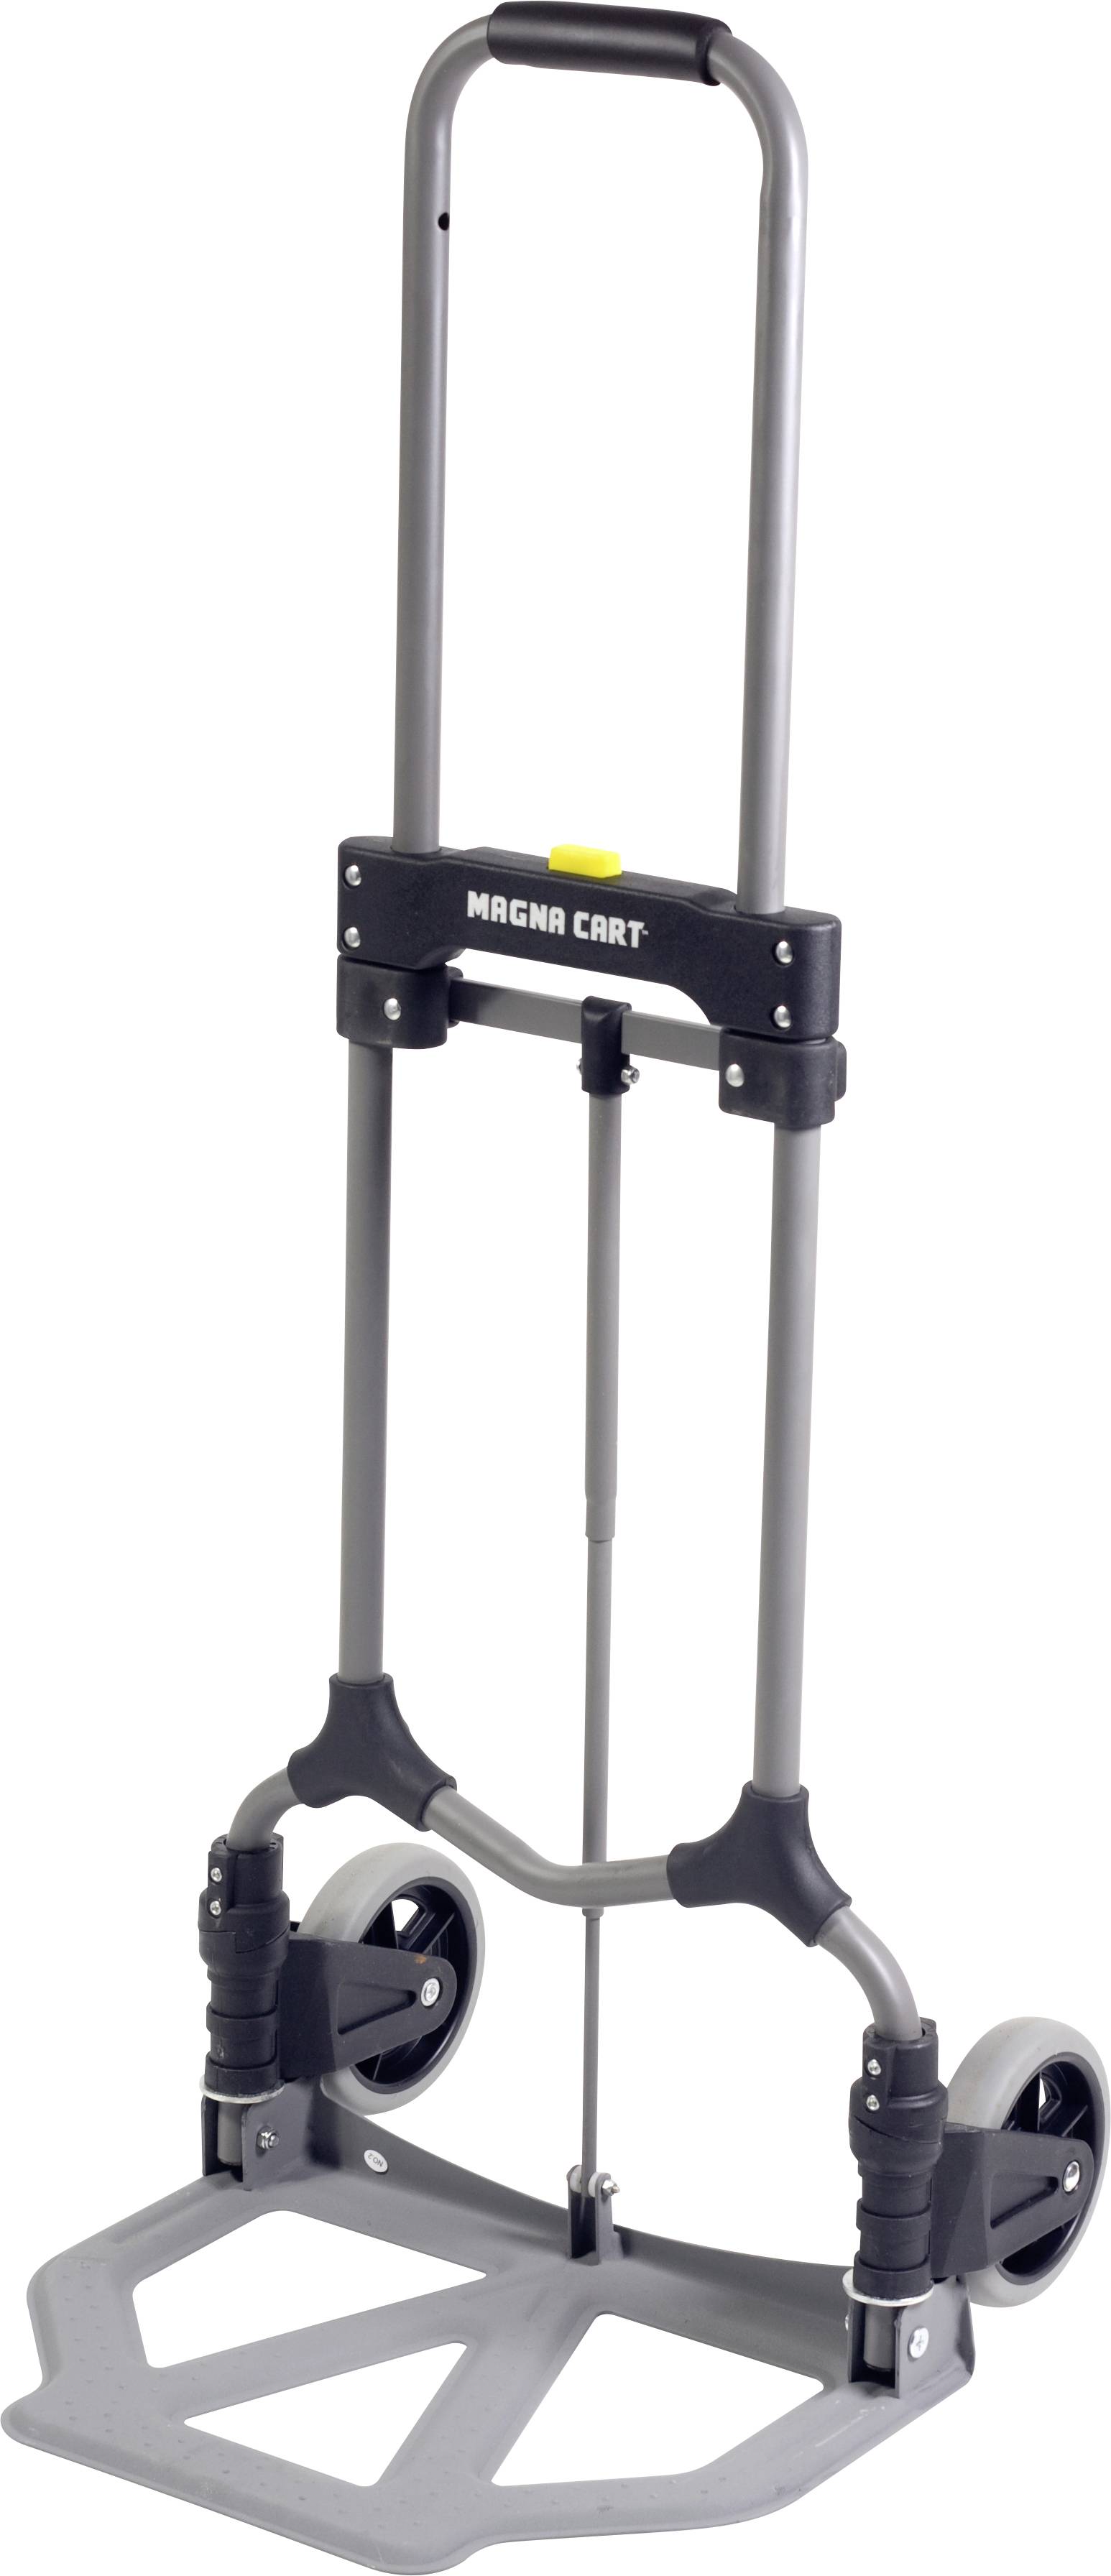 STANLEY STANLEY FT-591 HAND TRUCK 270 kg SXWTD-FT591 Diable pliable Charge  max: 270 kg - Conrad Electronic France